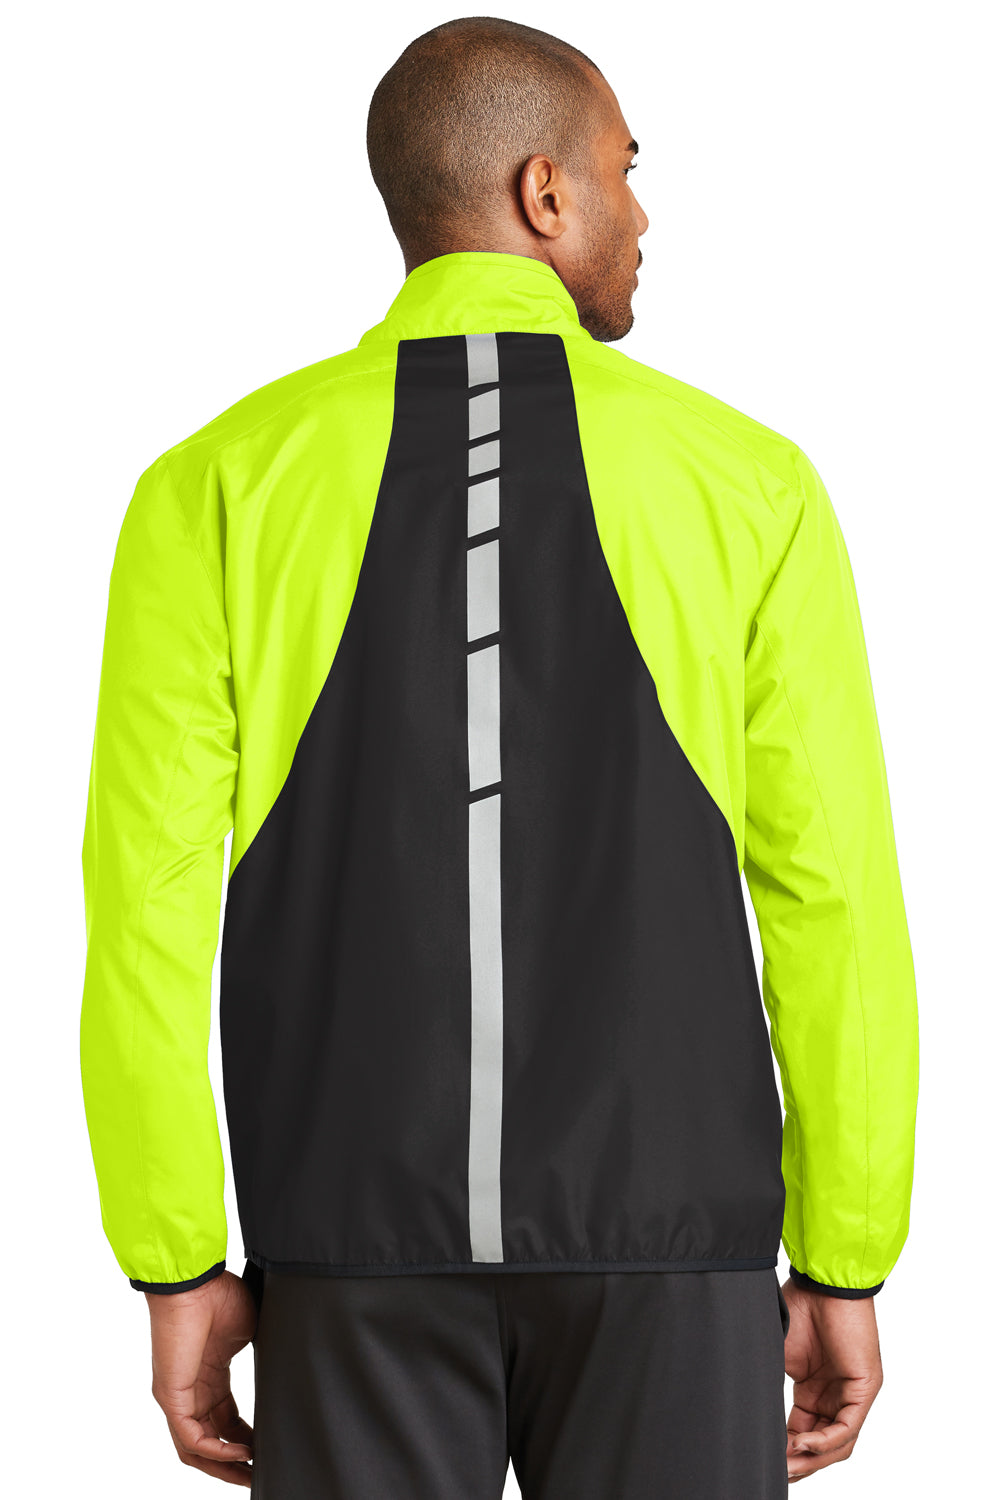 Port Authority J345 Mens Zephyr Reflective Hit Wind & Water Resistant Full Zip Jacket Safety Yellow Back